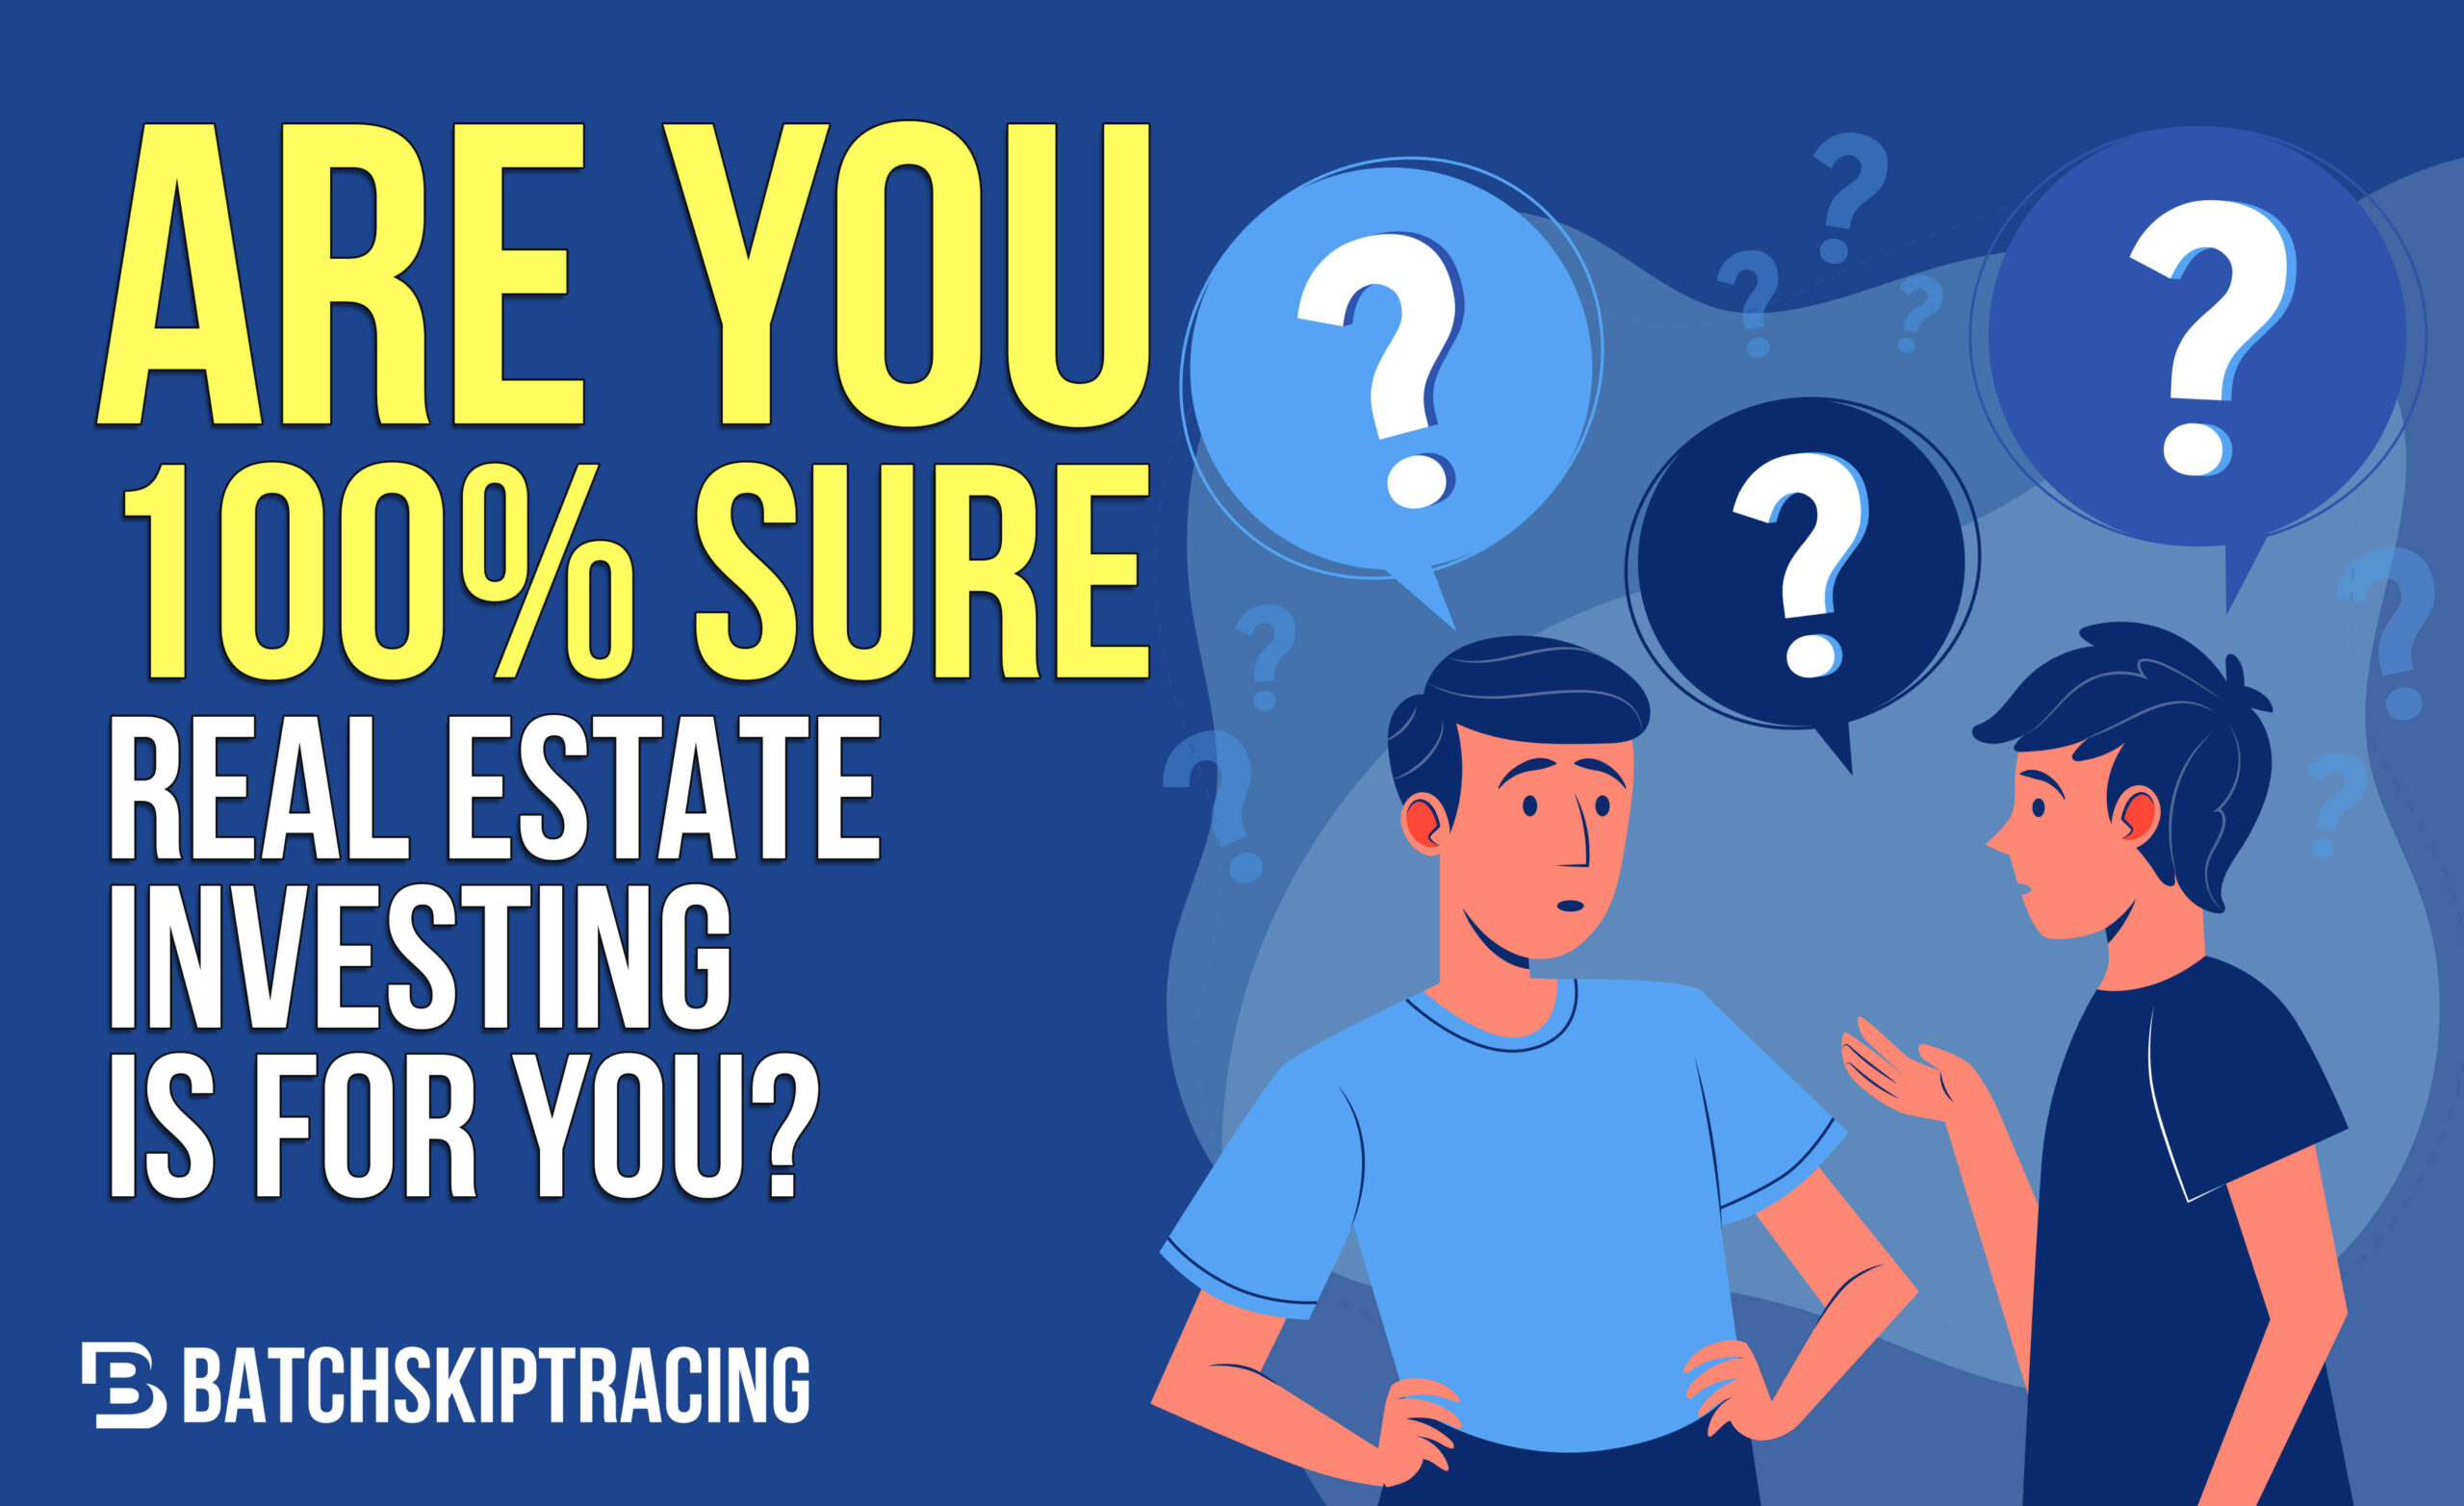 Are You 100 Sure Real Estate Investing Is for You